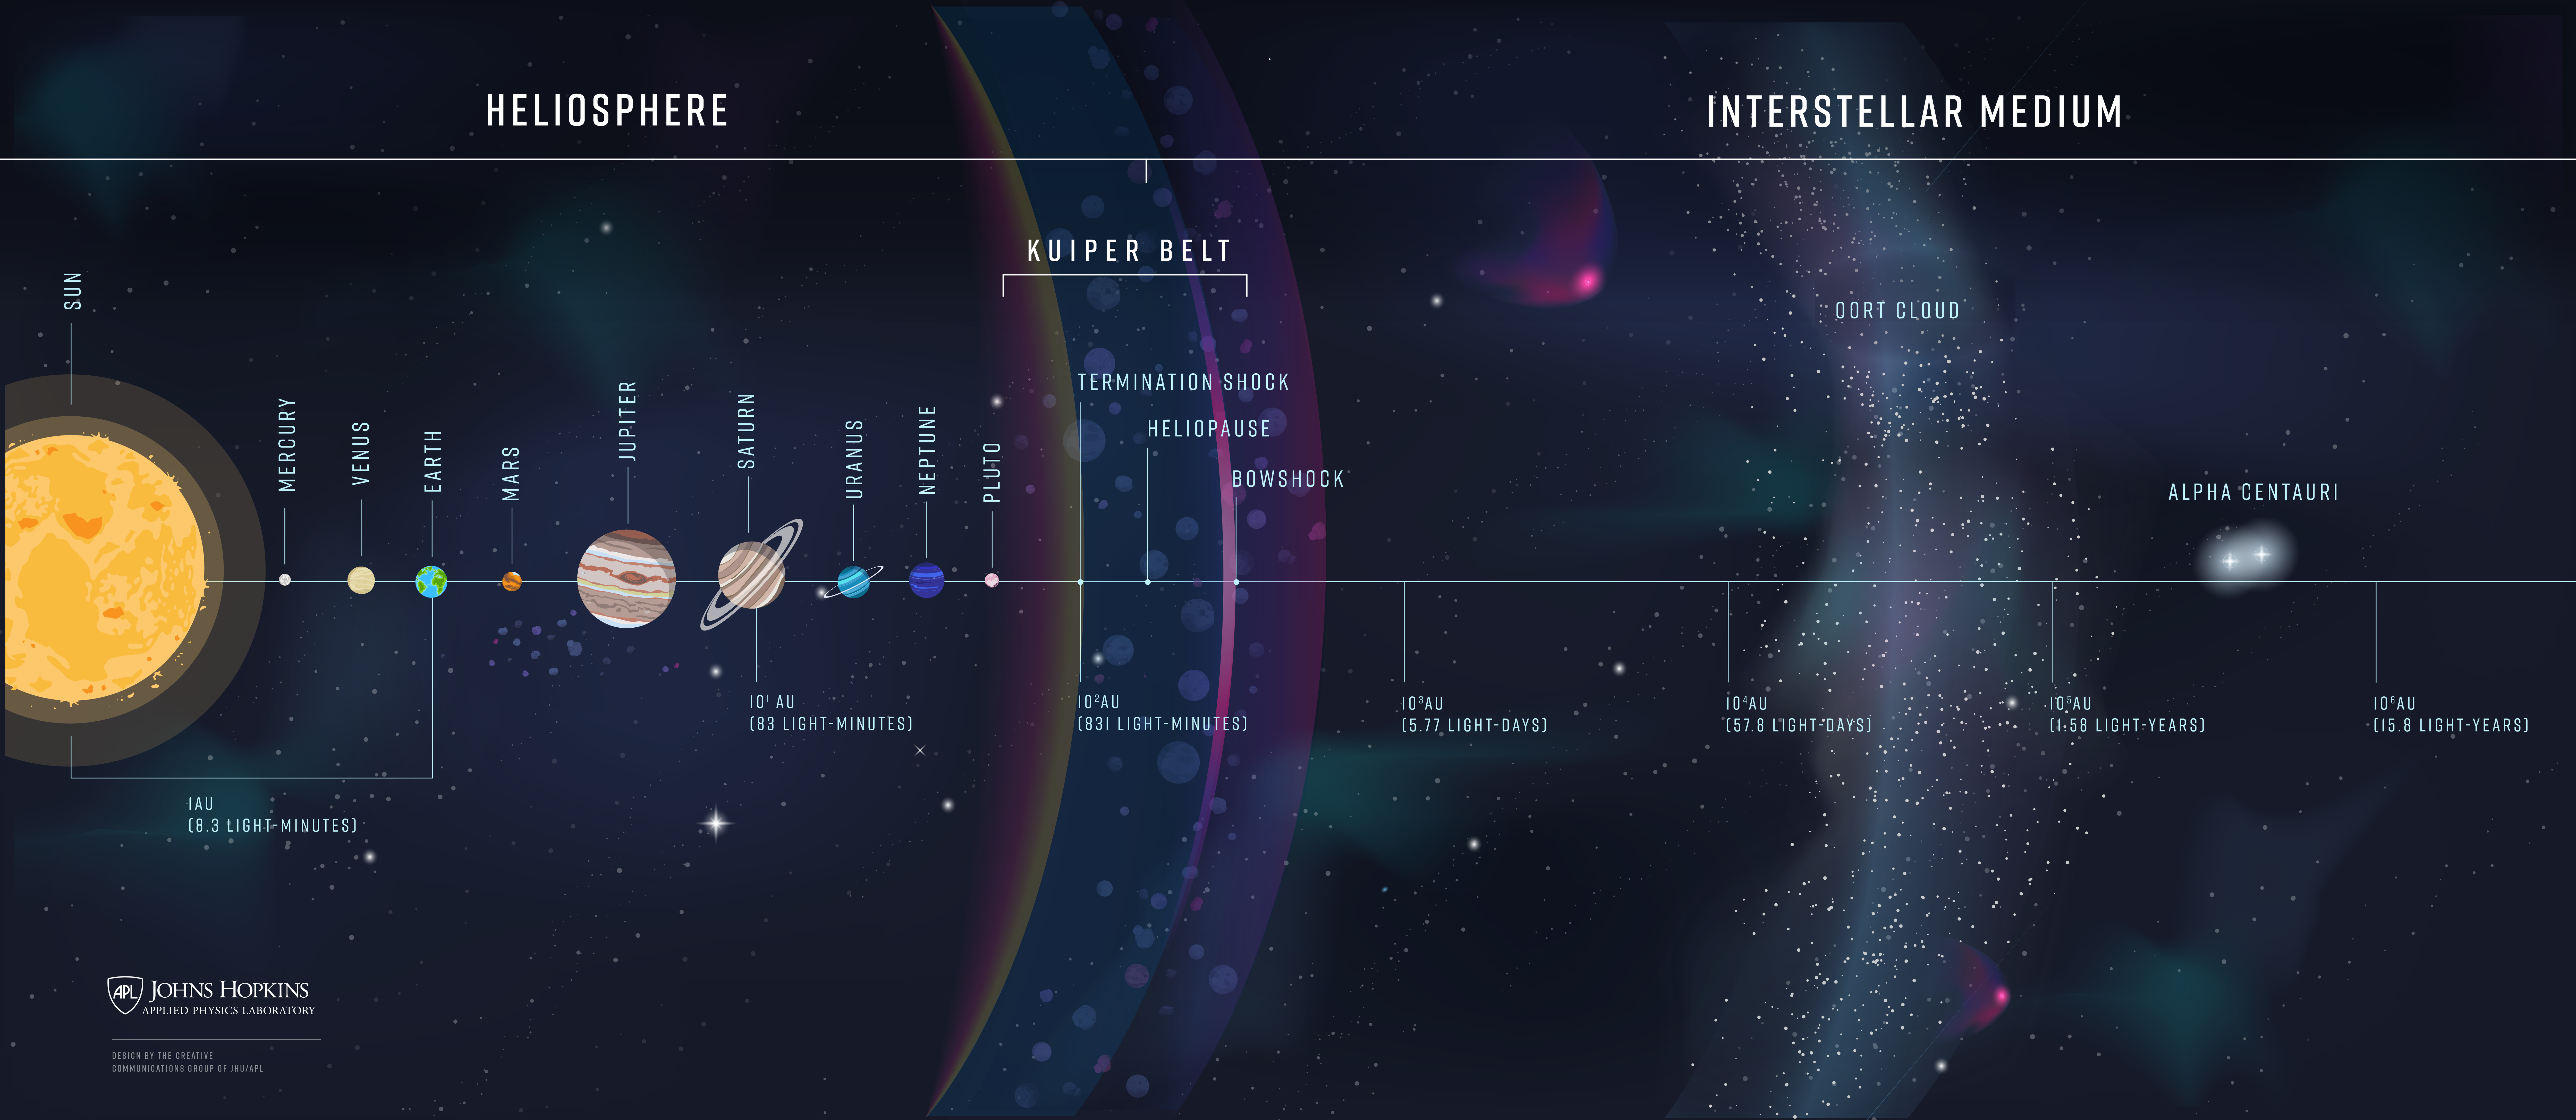 The interstellar probe is a mission that takes decades to reach several hundred astronomical units.